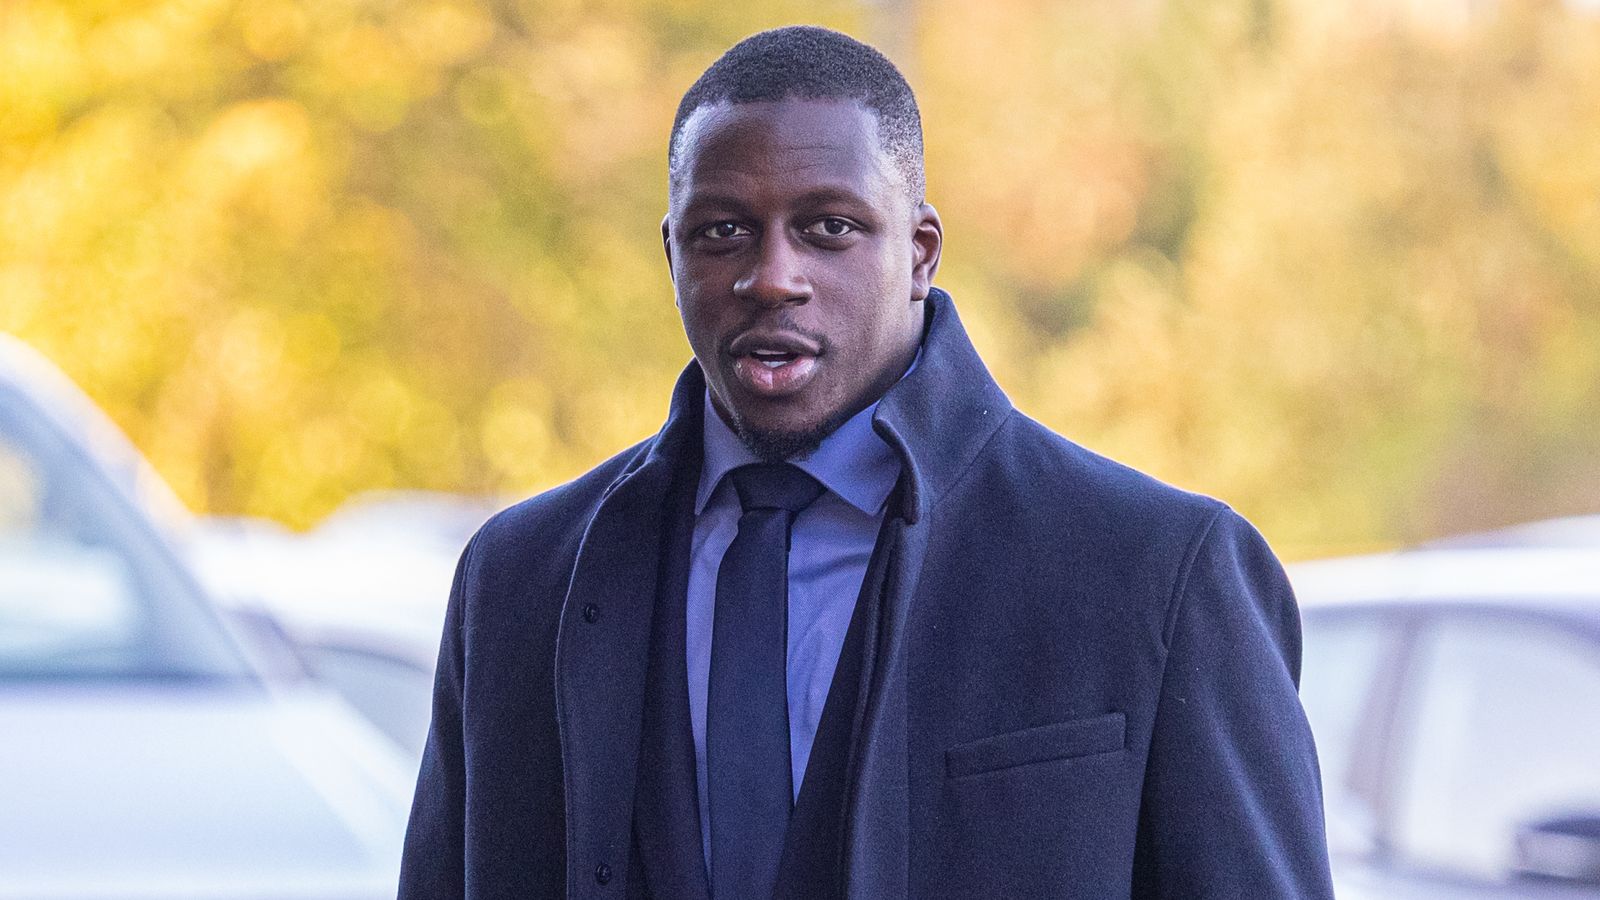 Benjamin Mendy accuser asked for Jack Grealish's number after alleged rape, court hears